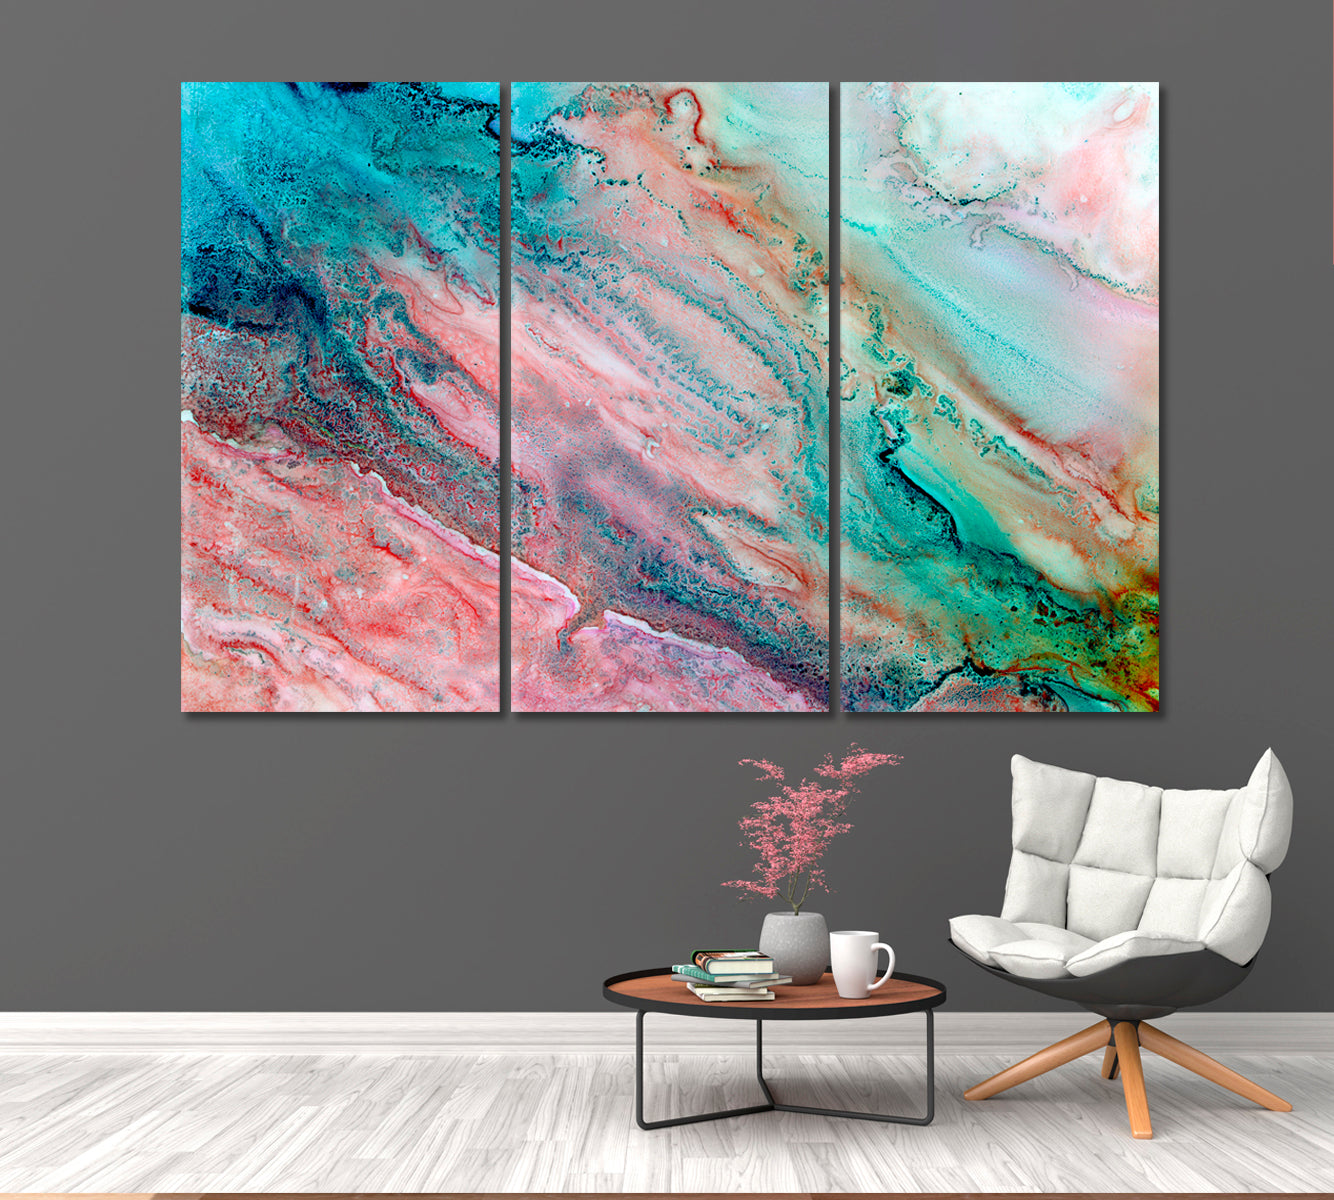 Abstract Pink Turquoise And Blue Marble Canvas Print-Canvas Print-CetArt-3 Panels-36x24 inches-CetArt